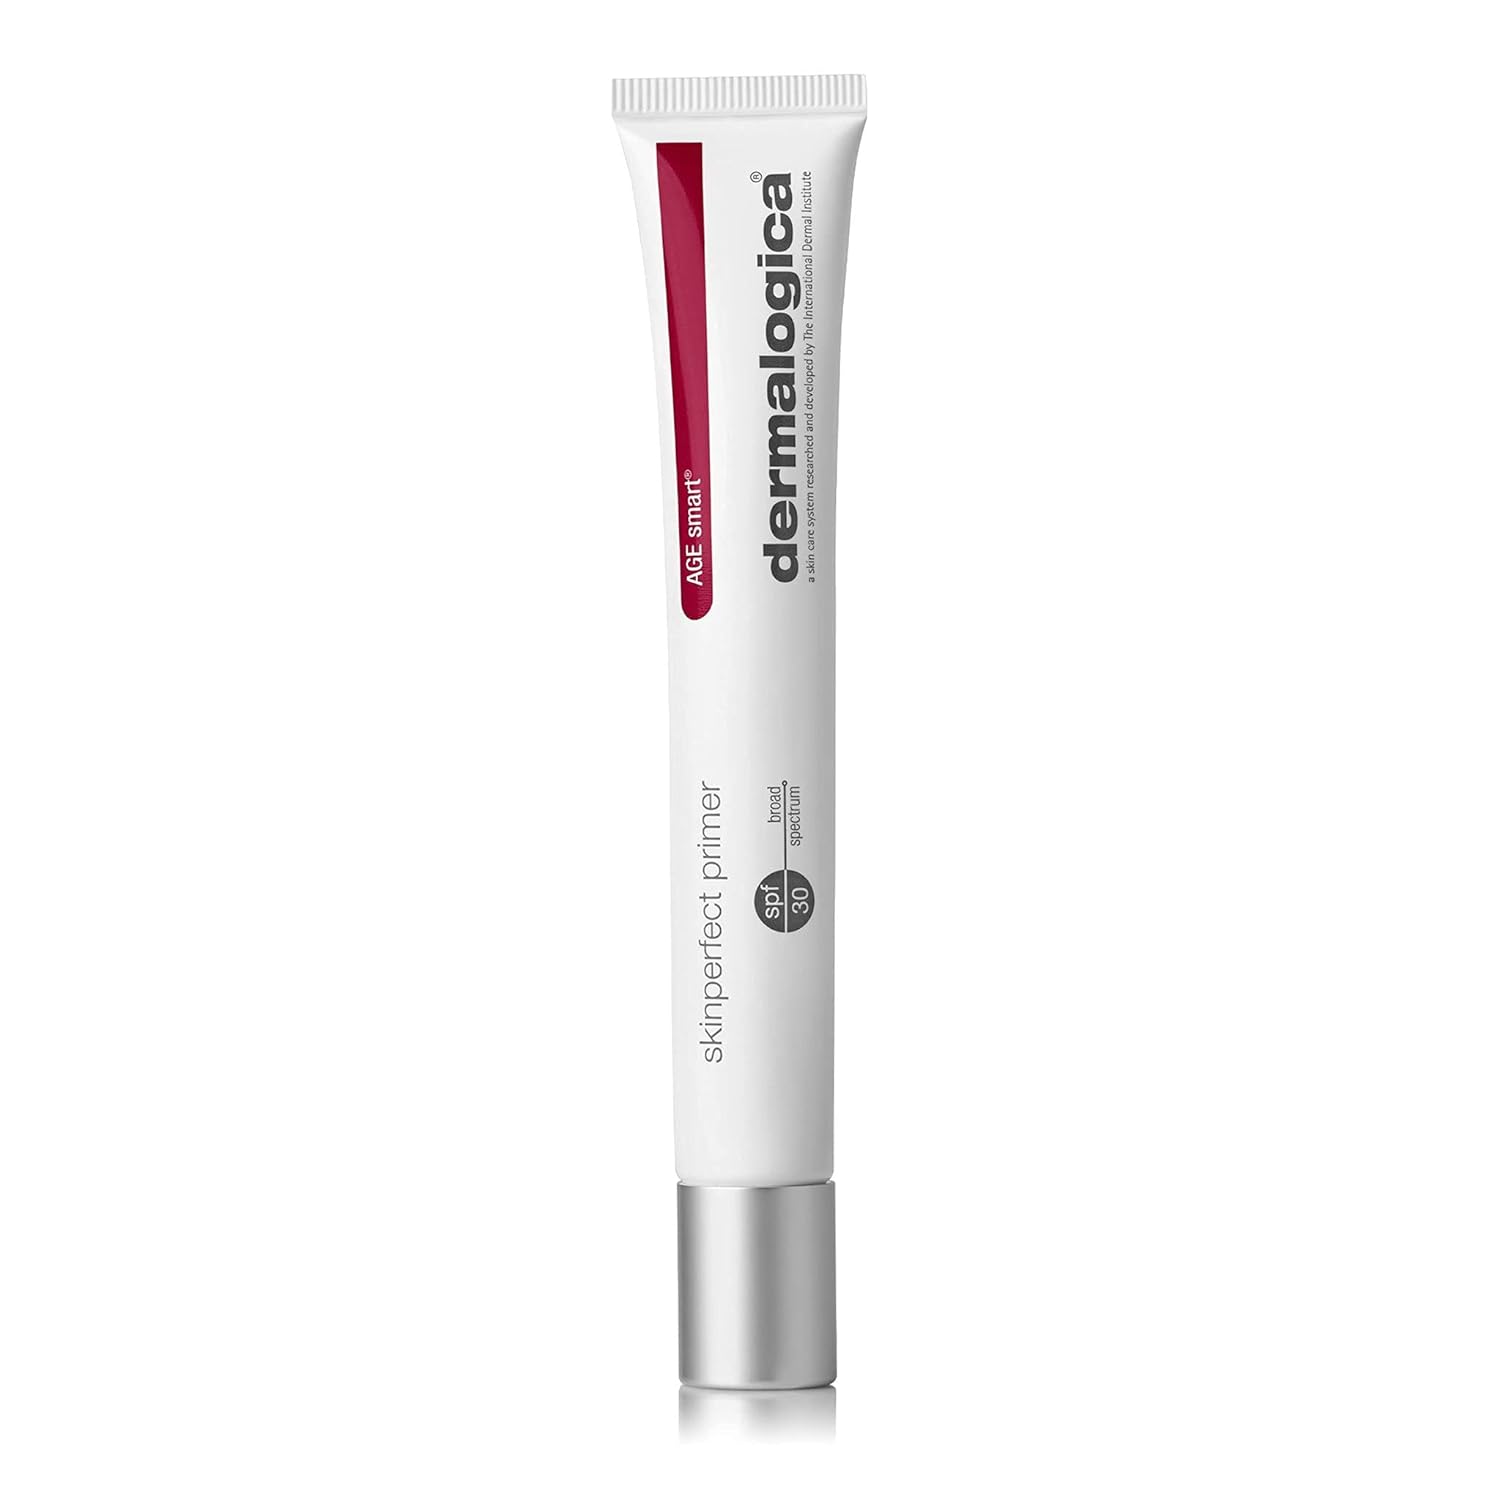 Dermalogica Skinperfect Primer SPF30, Anti-Aging Makeup Primer with Broad Spectrum Sunscreen - Brighten and Prime For awless Skin, 0.75   (Pack of 1)